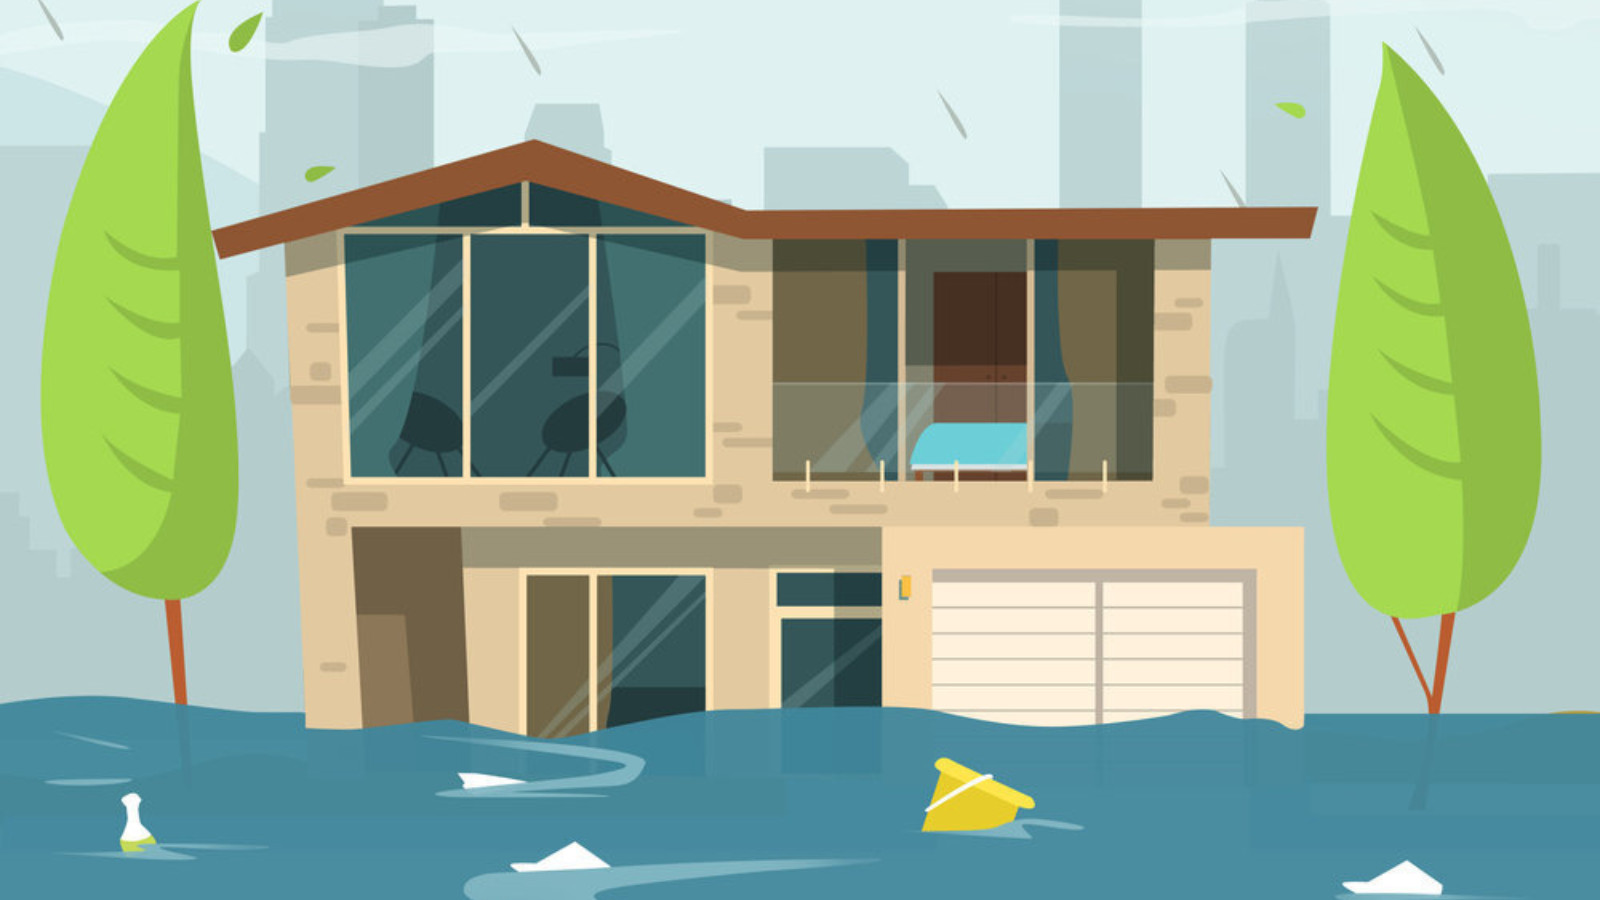 Why You Must Have Flood Insurance Even If You Don't Live In A Flood Zone